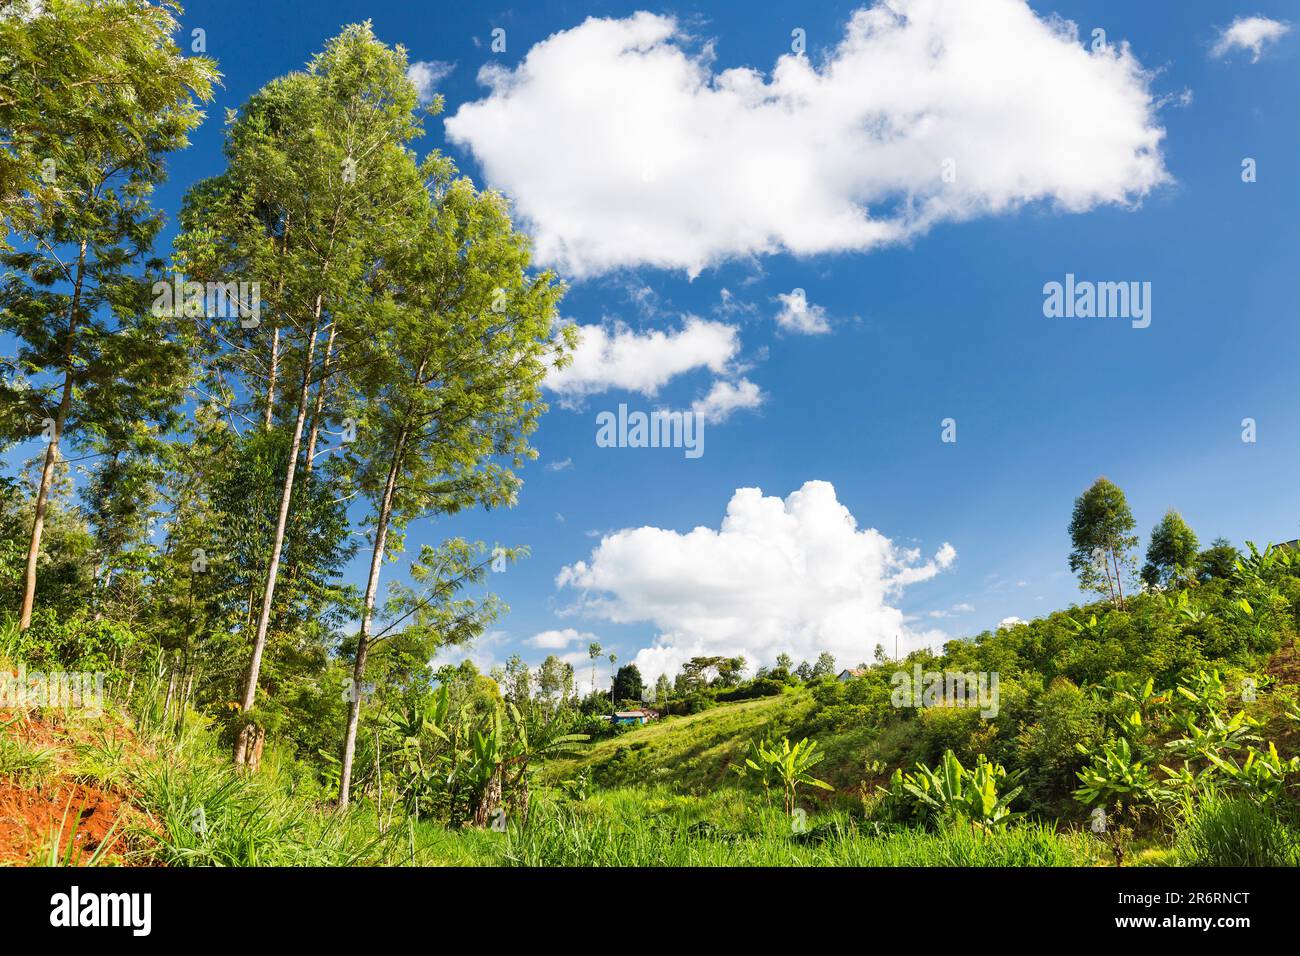 One of the typcal valleys in the highlands of Kiambu County north of Nairobi in Kenya used for agriculture by the local farmers. Stock Photo